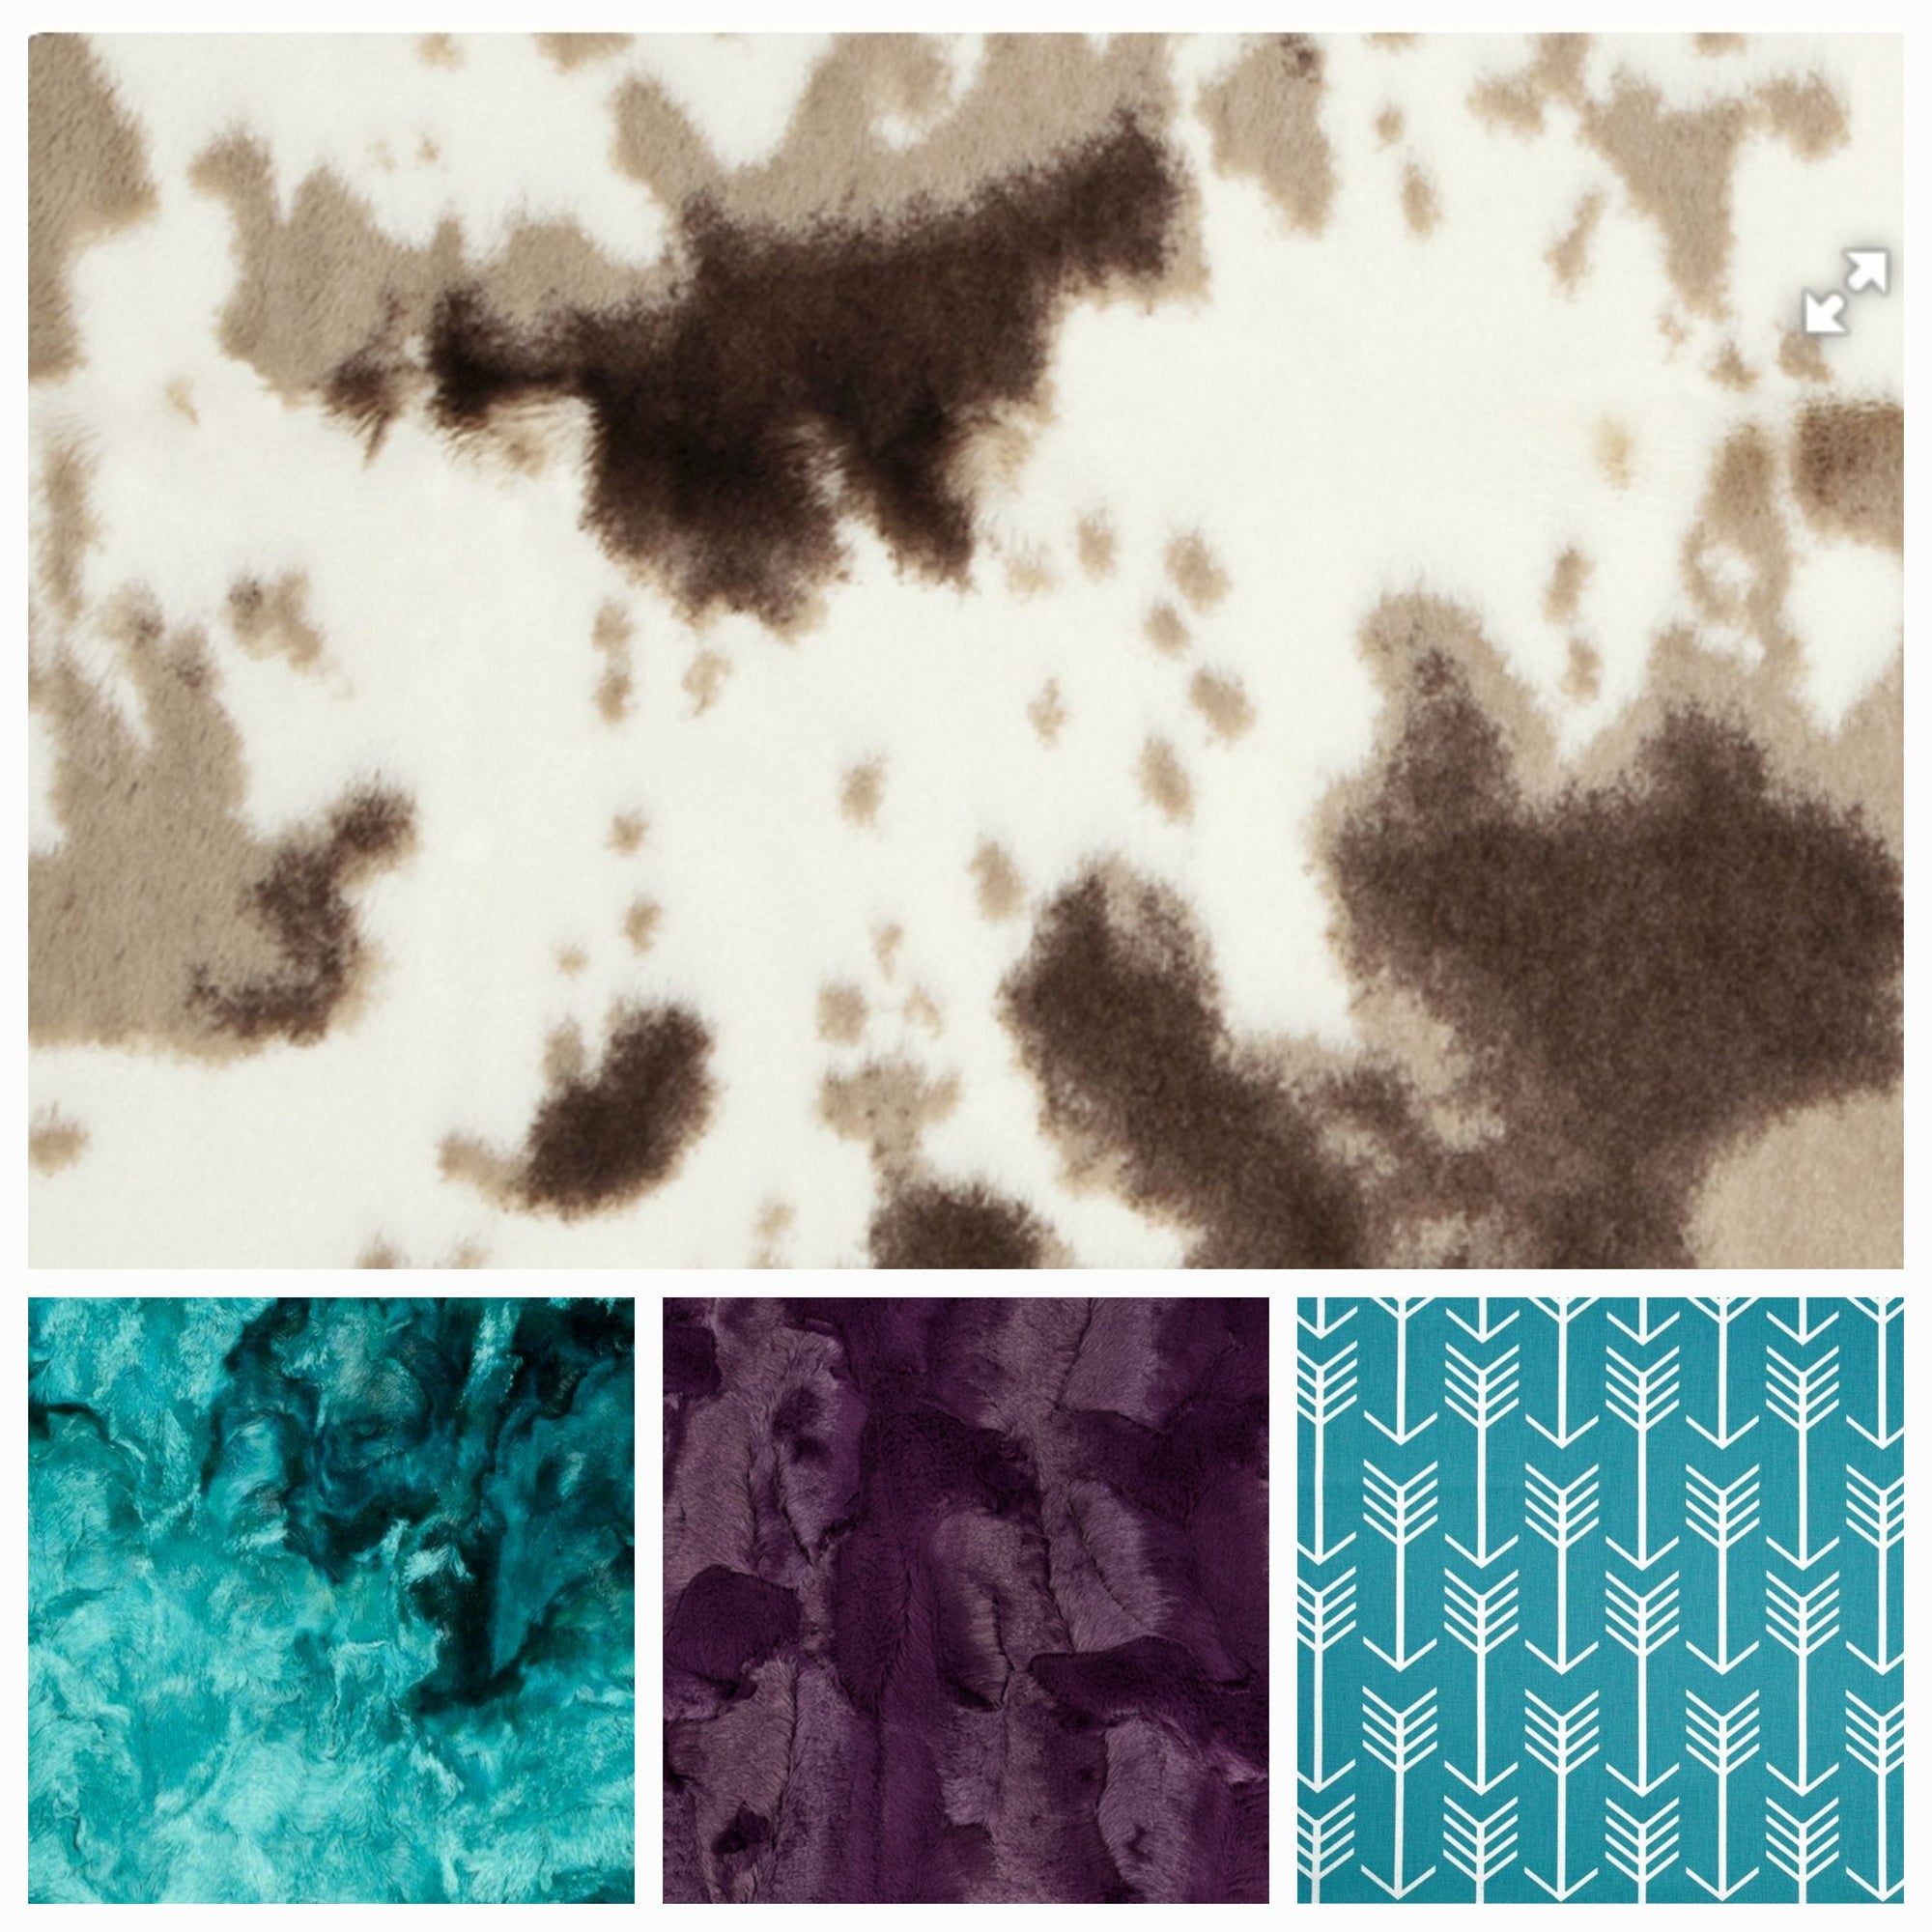 New Release Girl Crib Bedding- Brown Sugar Cow Minky and Teal Western Baby Bedding Collection - DBC Baby Bedding Co 